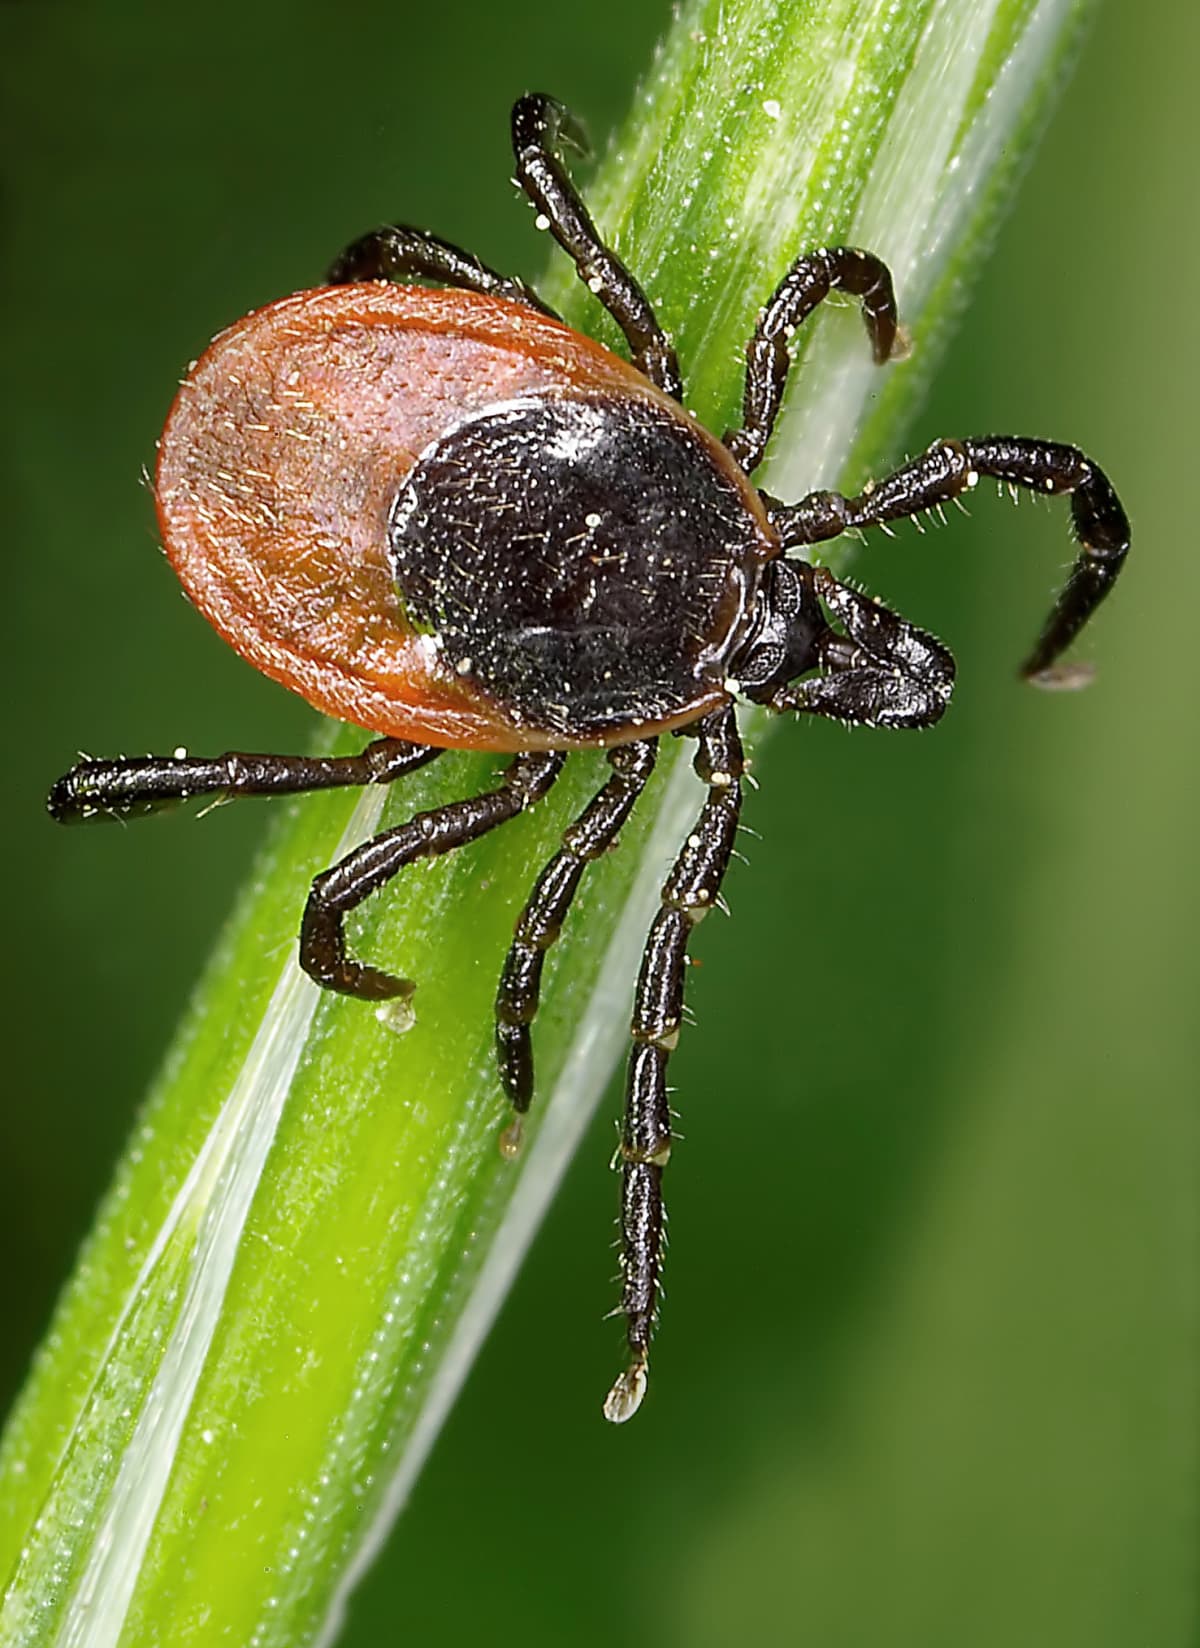 Digital photo of a castor bean tick, Ixodes ricinus, carrier of diseases like tbe and borreliosis on a grassblade. 